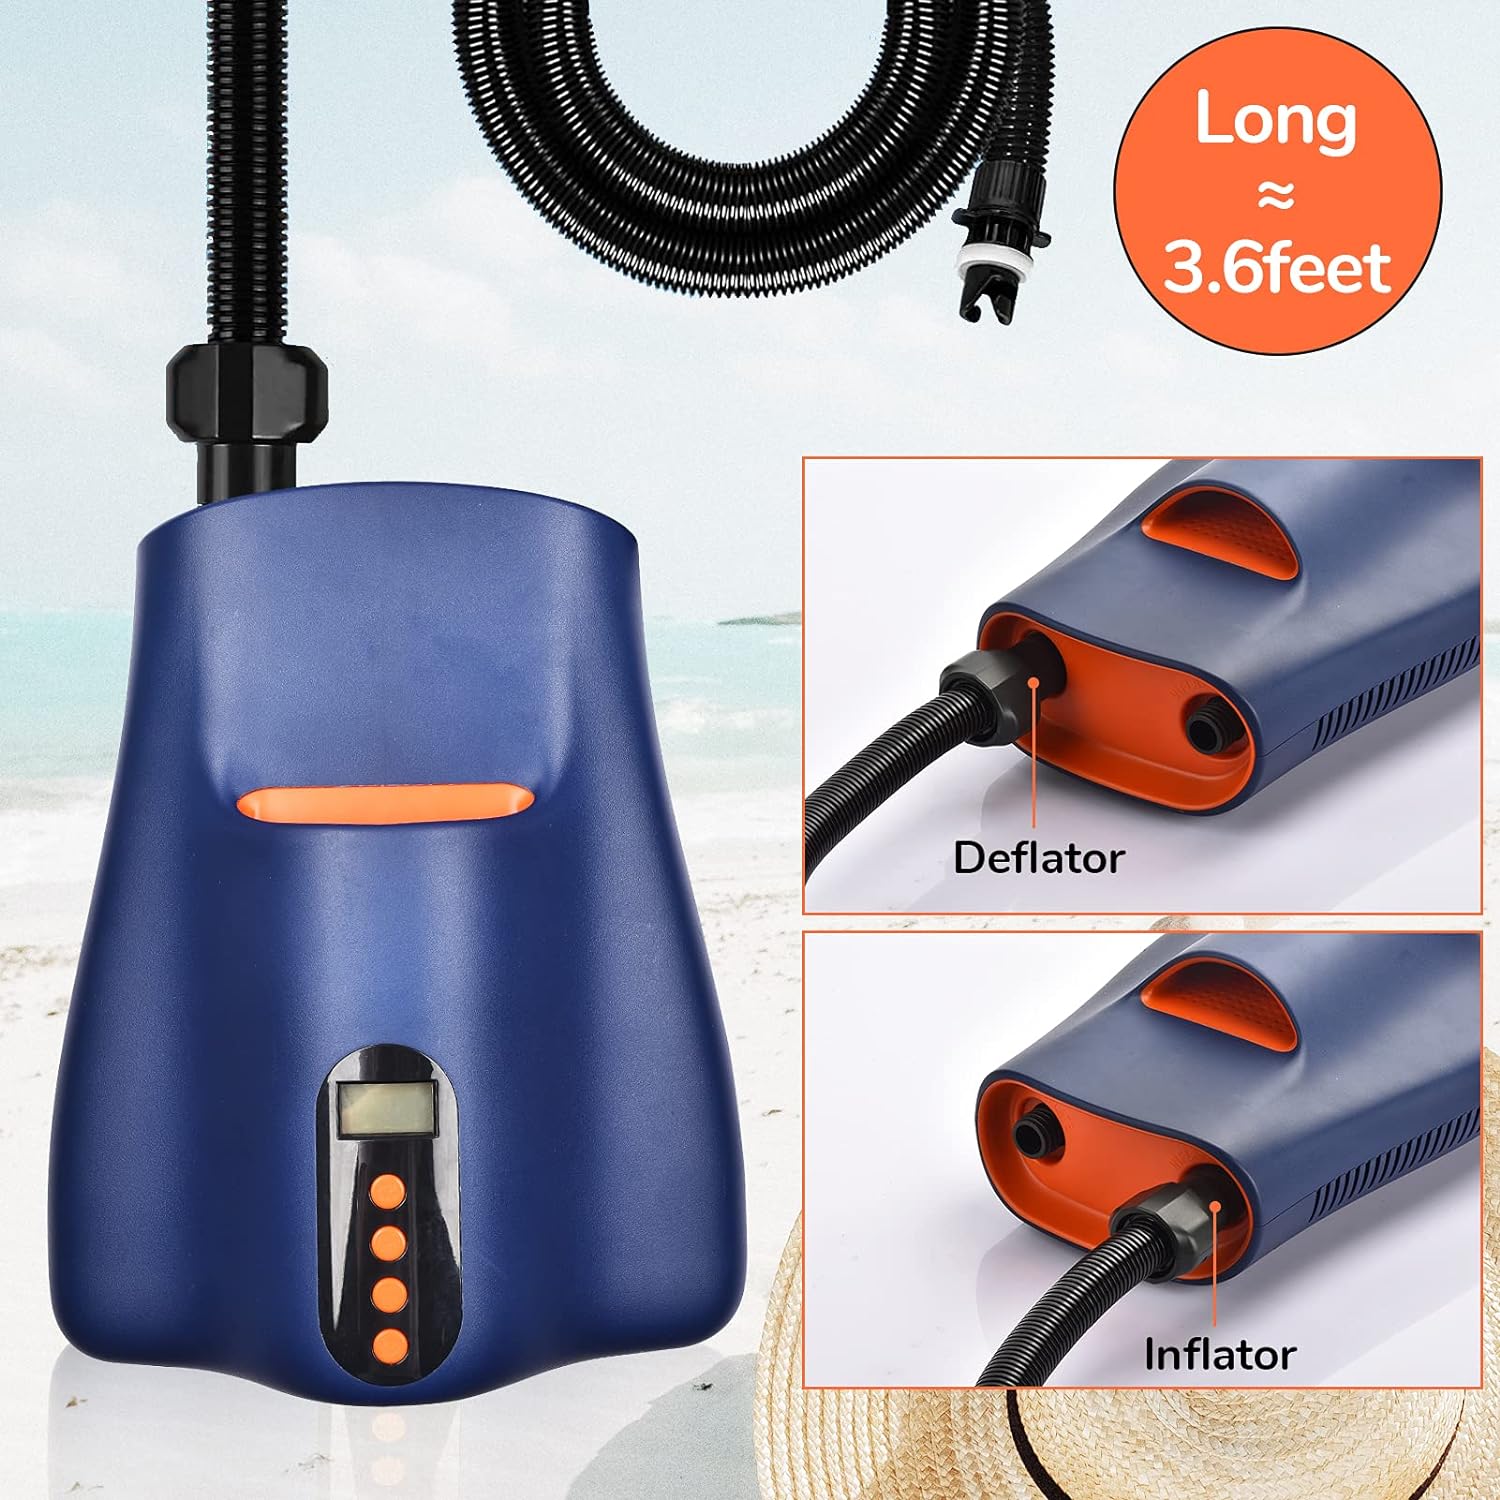 20PSI High-Pressure Pump Paddle Board - 12V DC Car Connector Intelligent Dual Stage Inflation, Deflation Function, Auto-Off Feature,for Inflatable Stand Up Paddle Boards, Boats Namiedstore